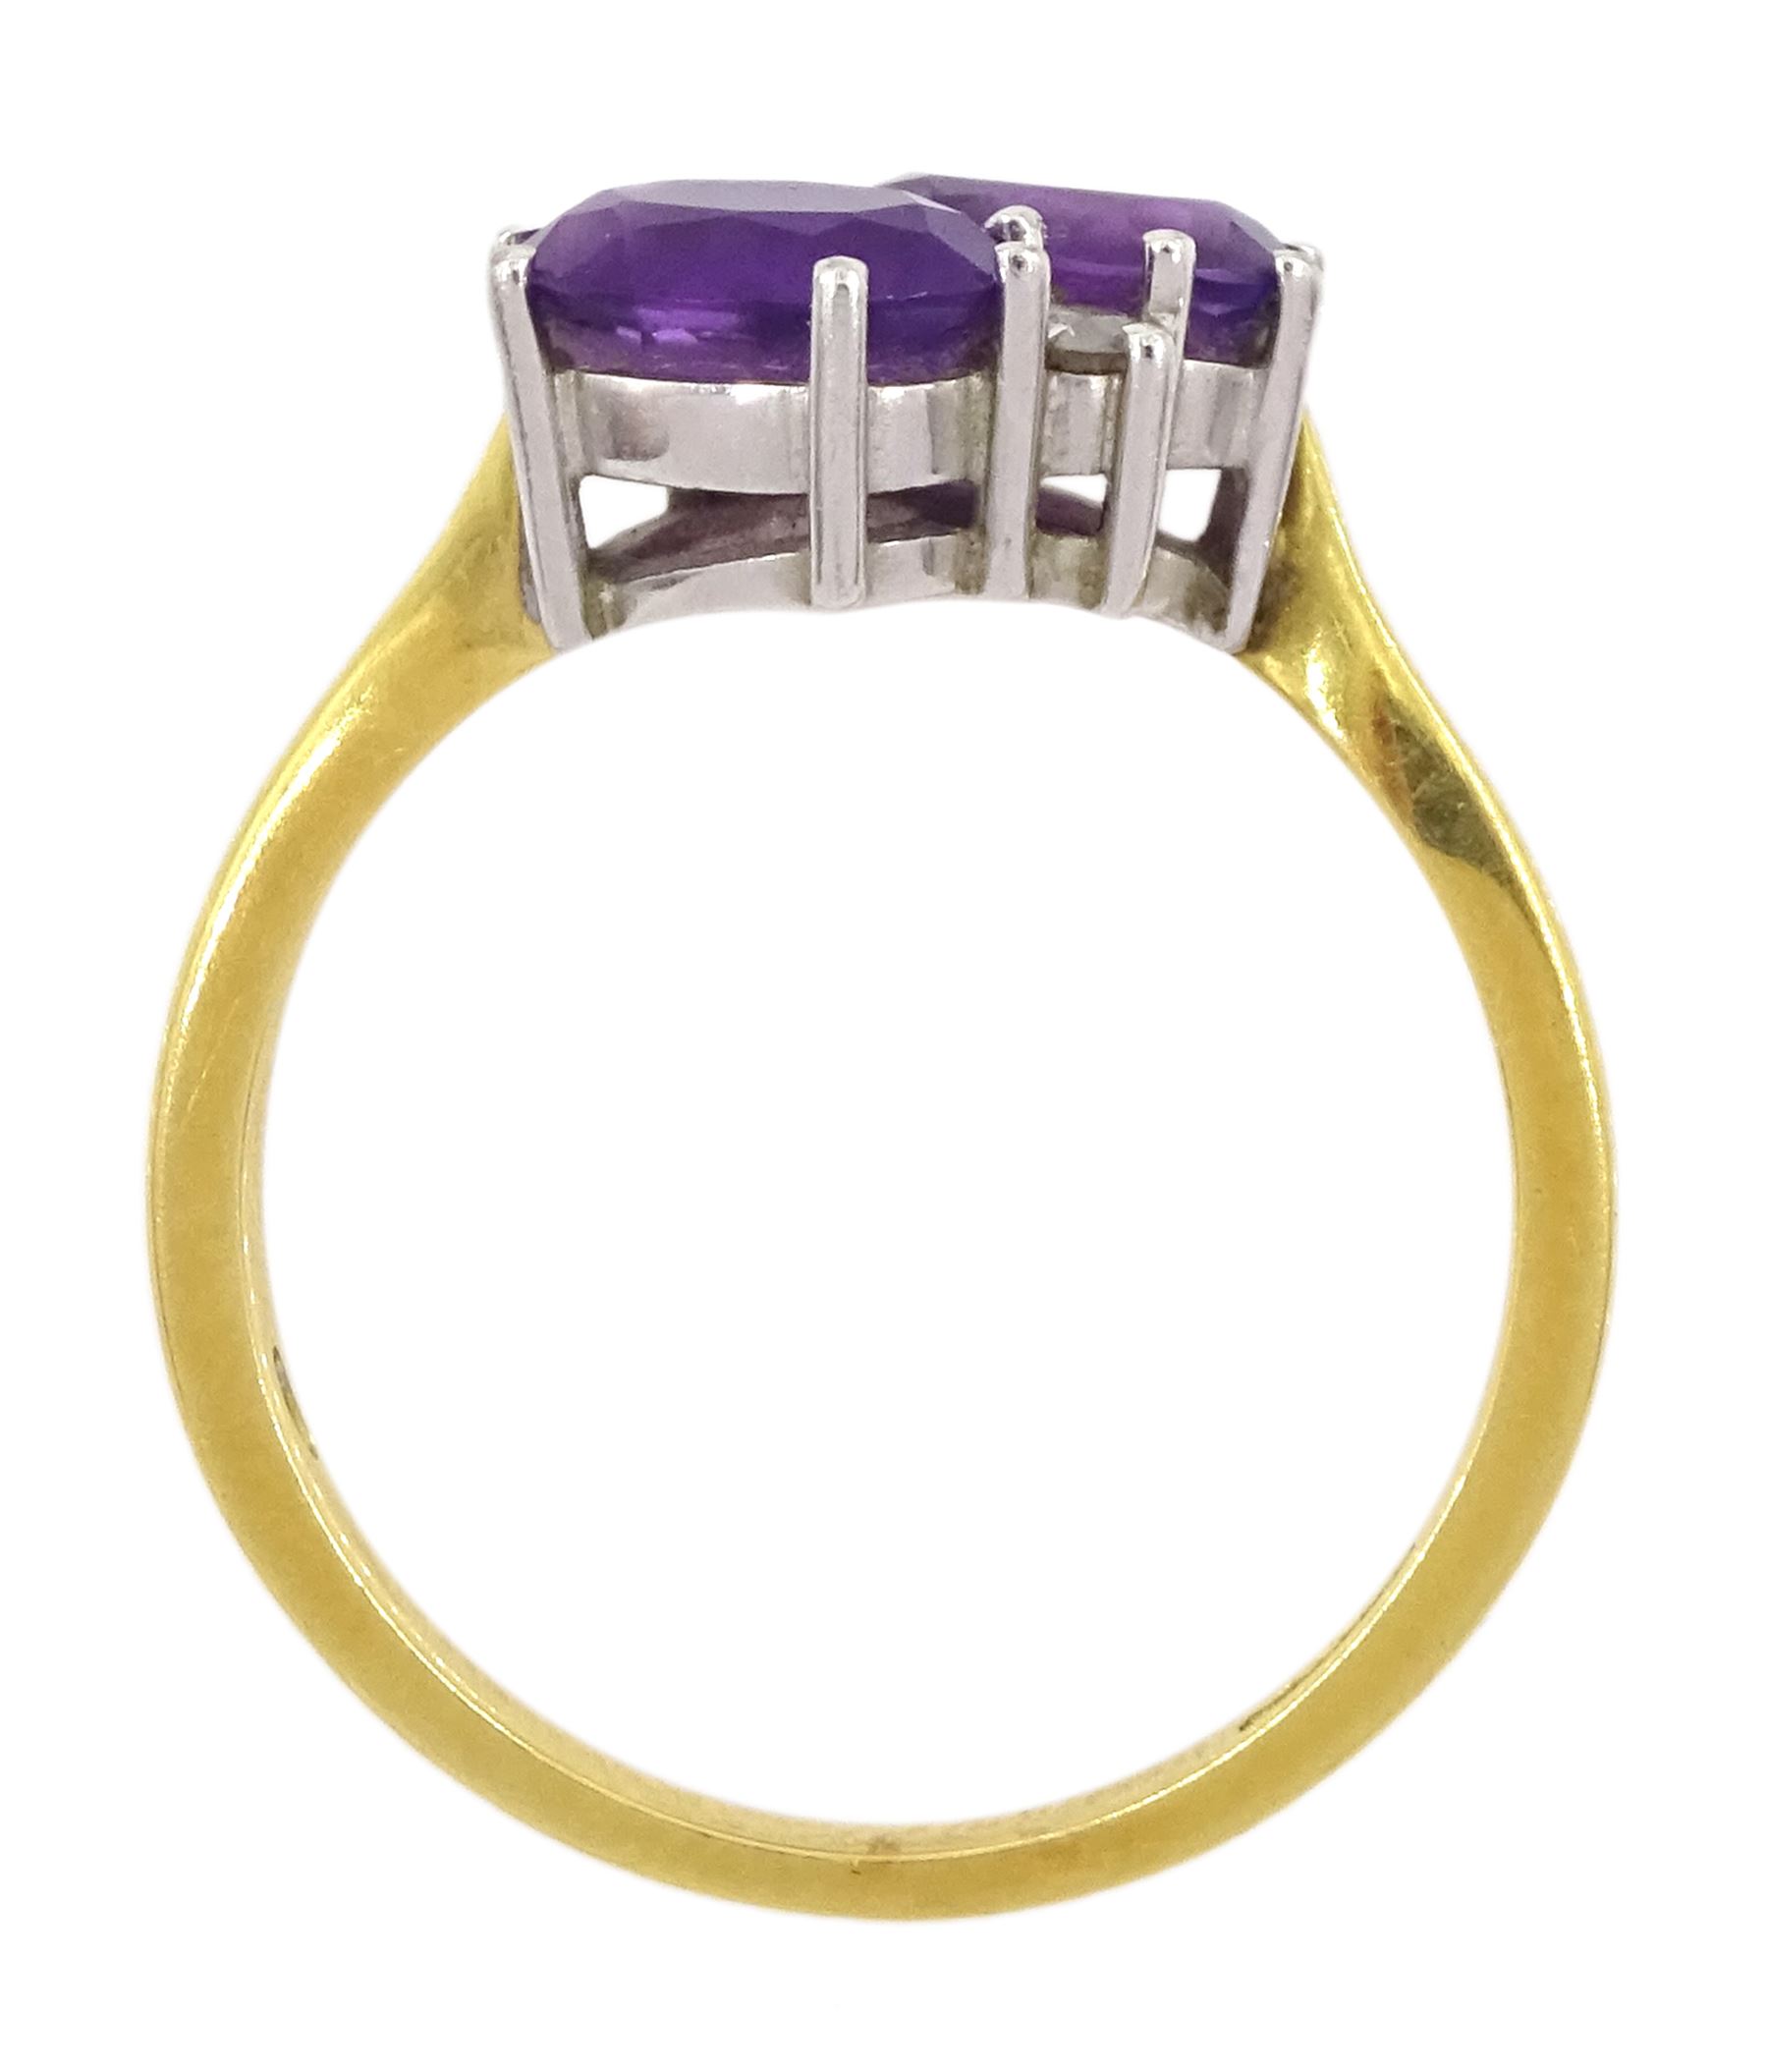 18ct gold four stone oval cut amethyst and round brilliant cut diamond ring - Image 4 of 4